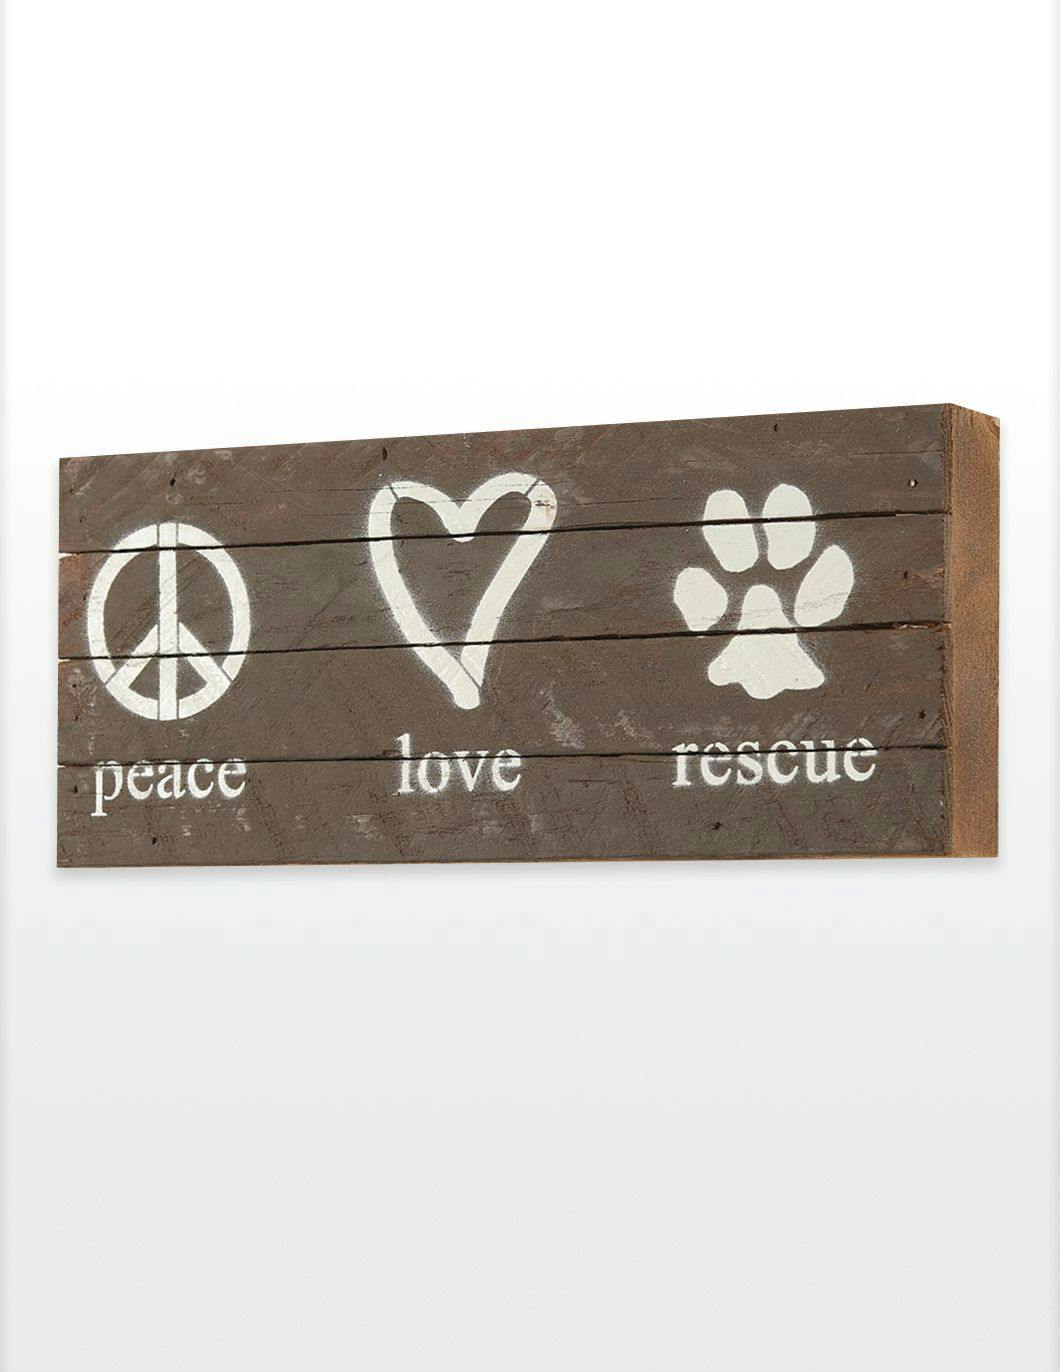 second-nature-by-hand-wall-art-14x6-peace-love-rescue